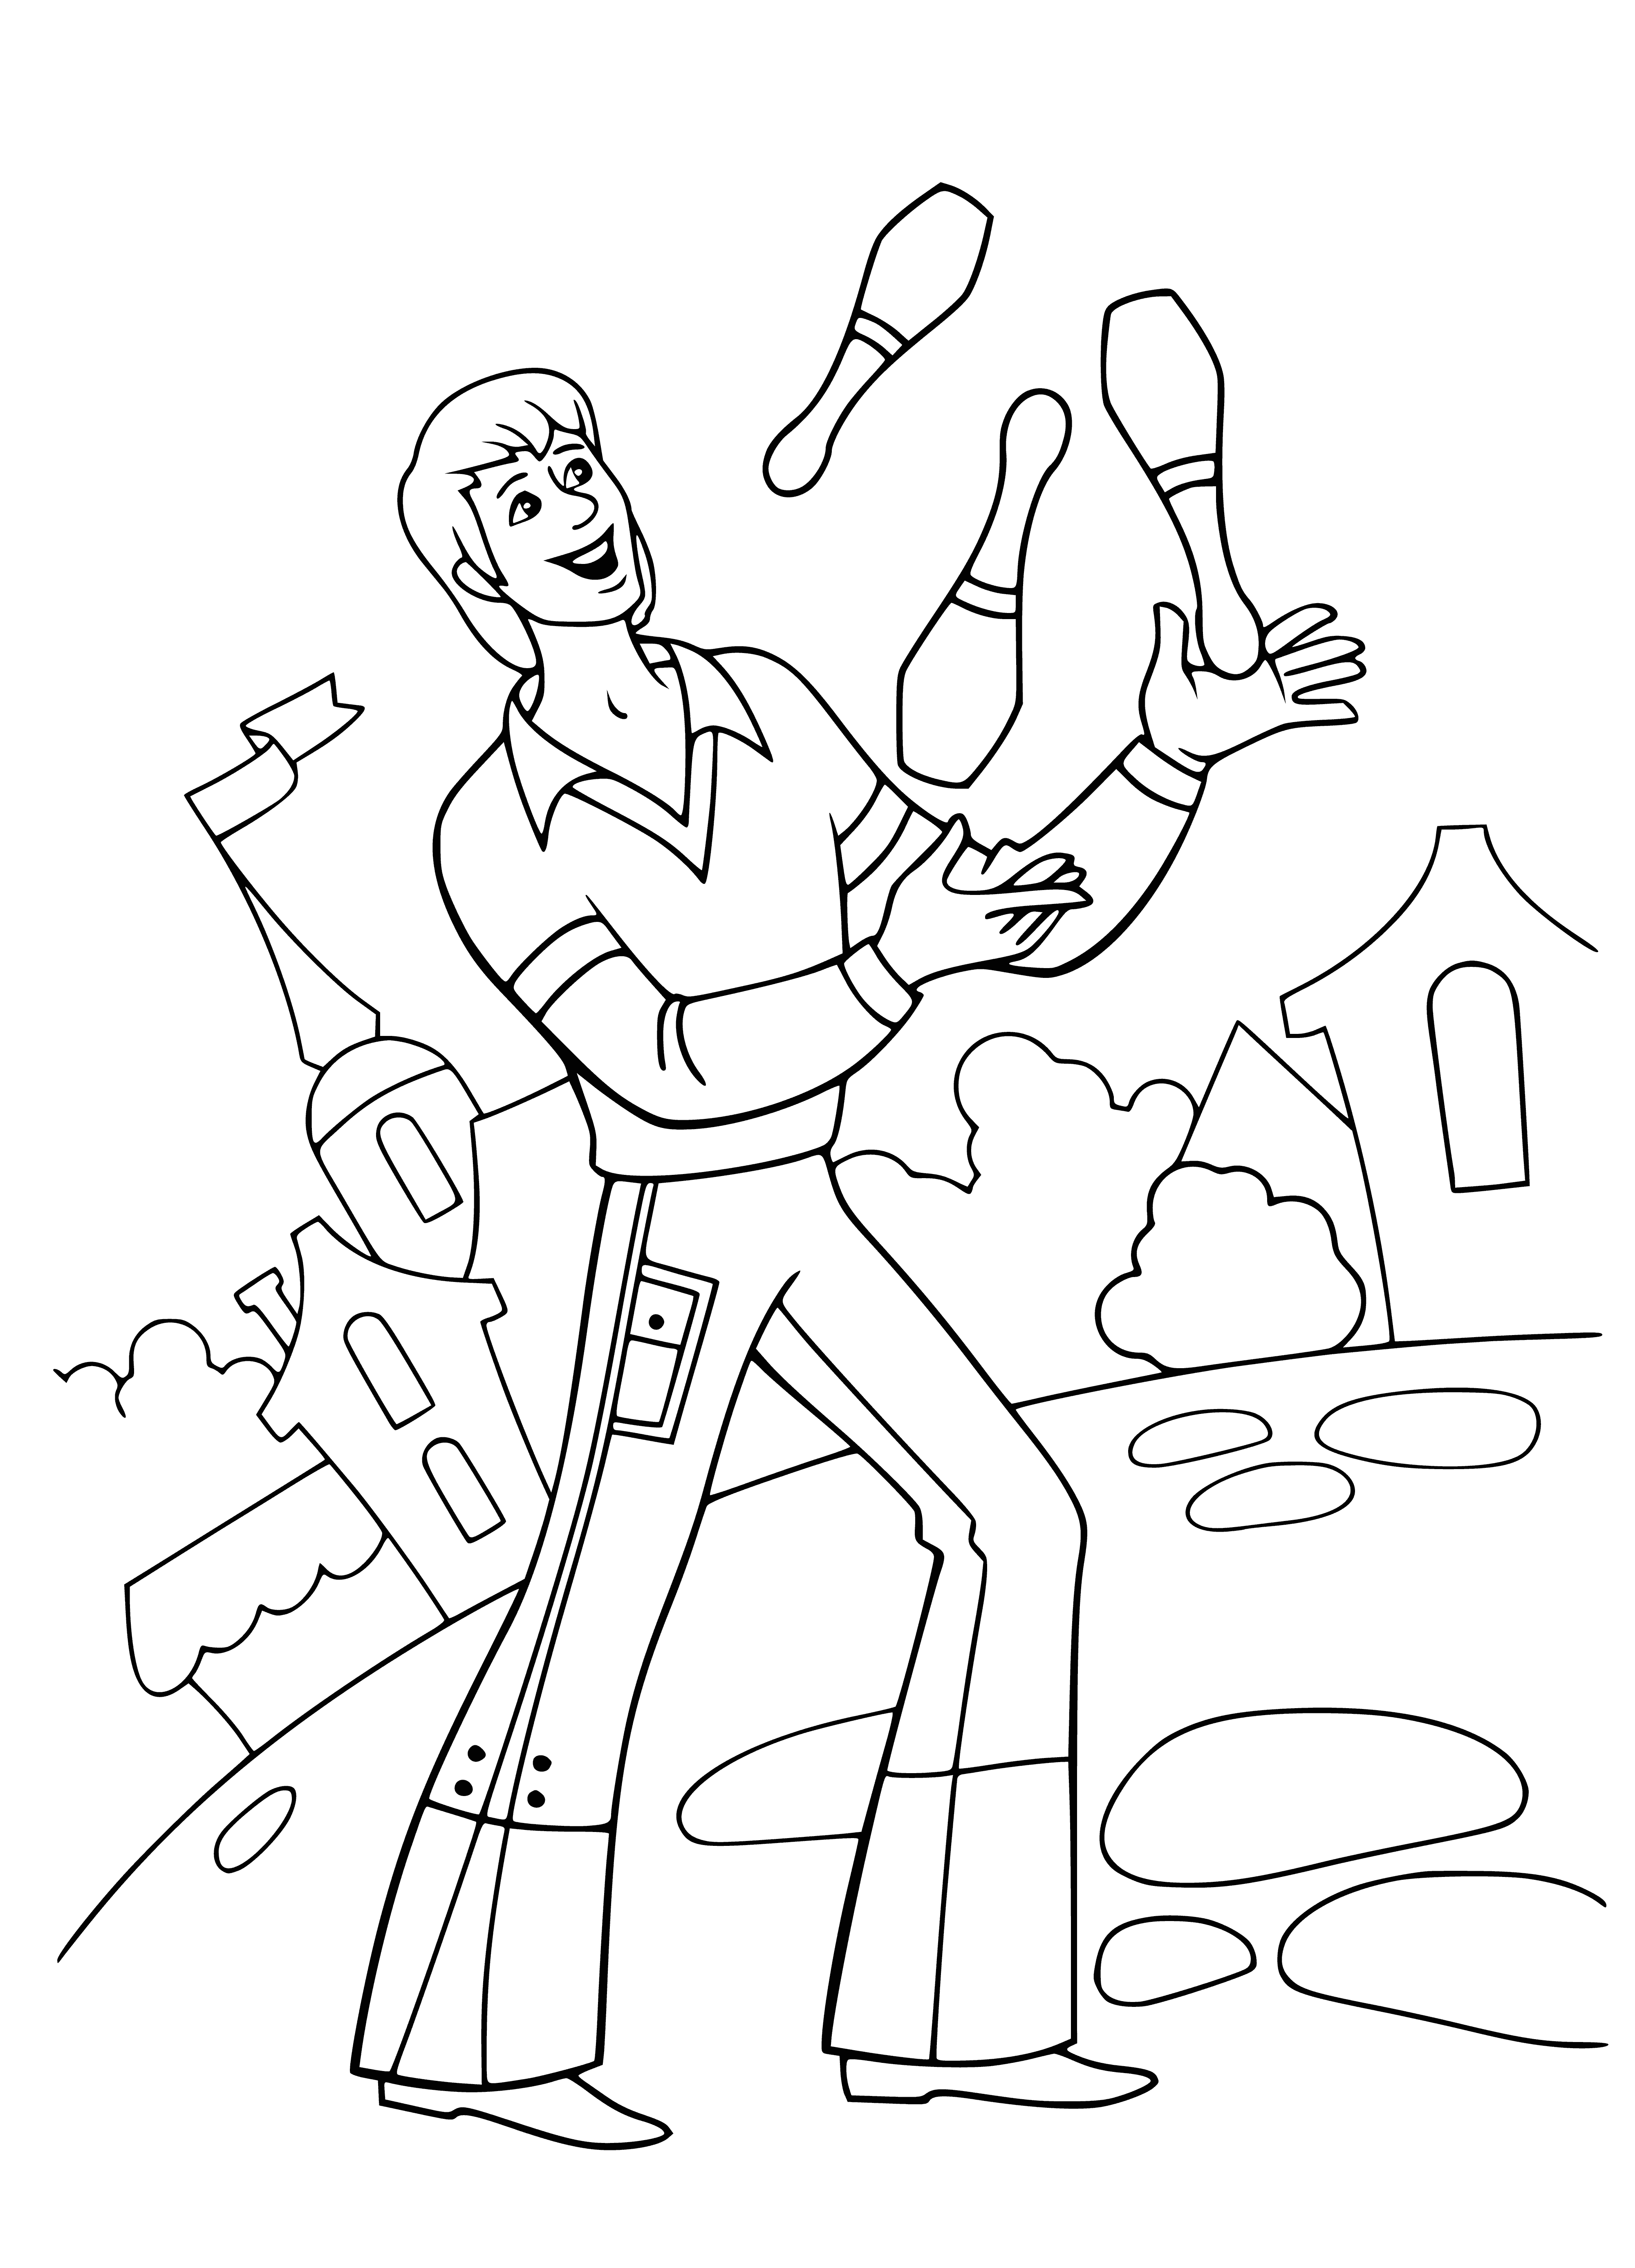 coloring page: 5 animals on a dirt road looking left - donkey, dog, cat, cock, and bass - towards a town in the distance.